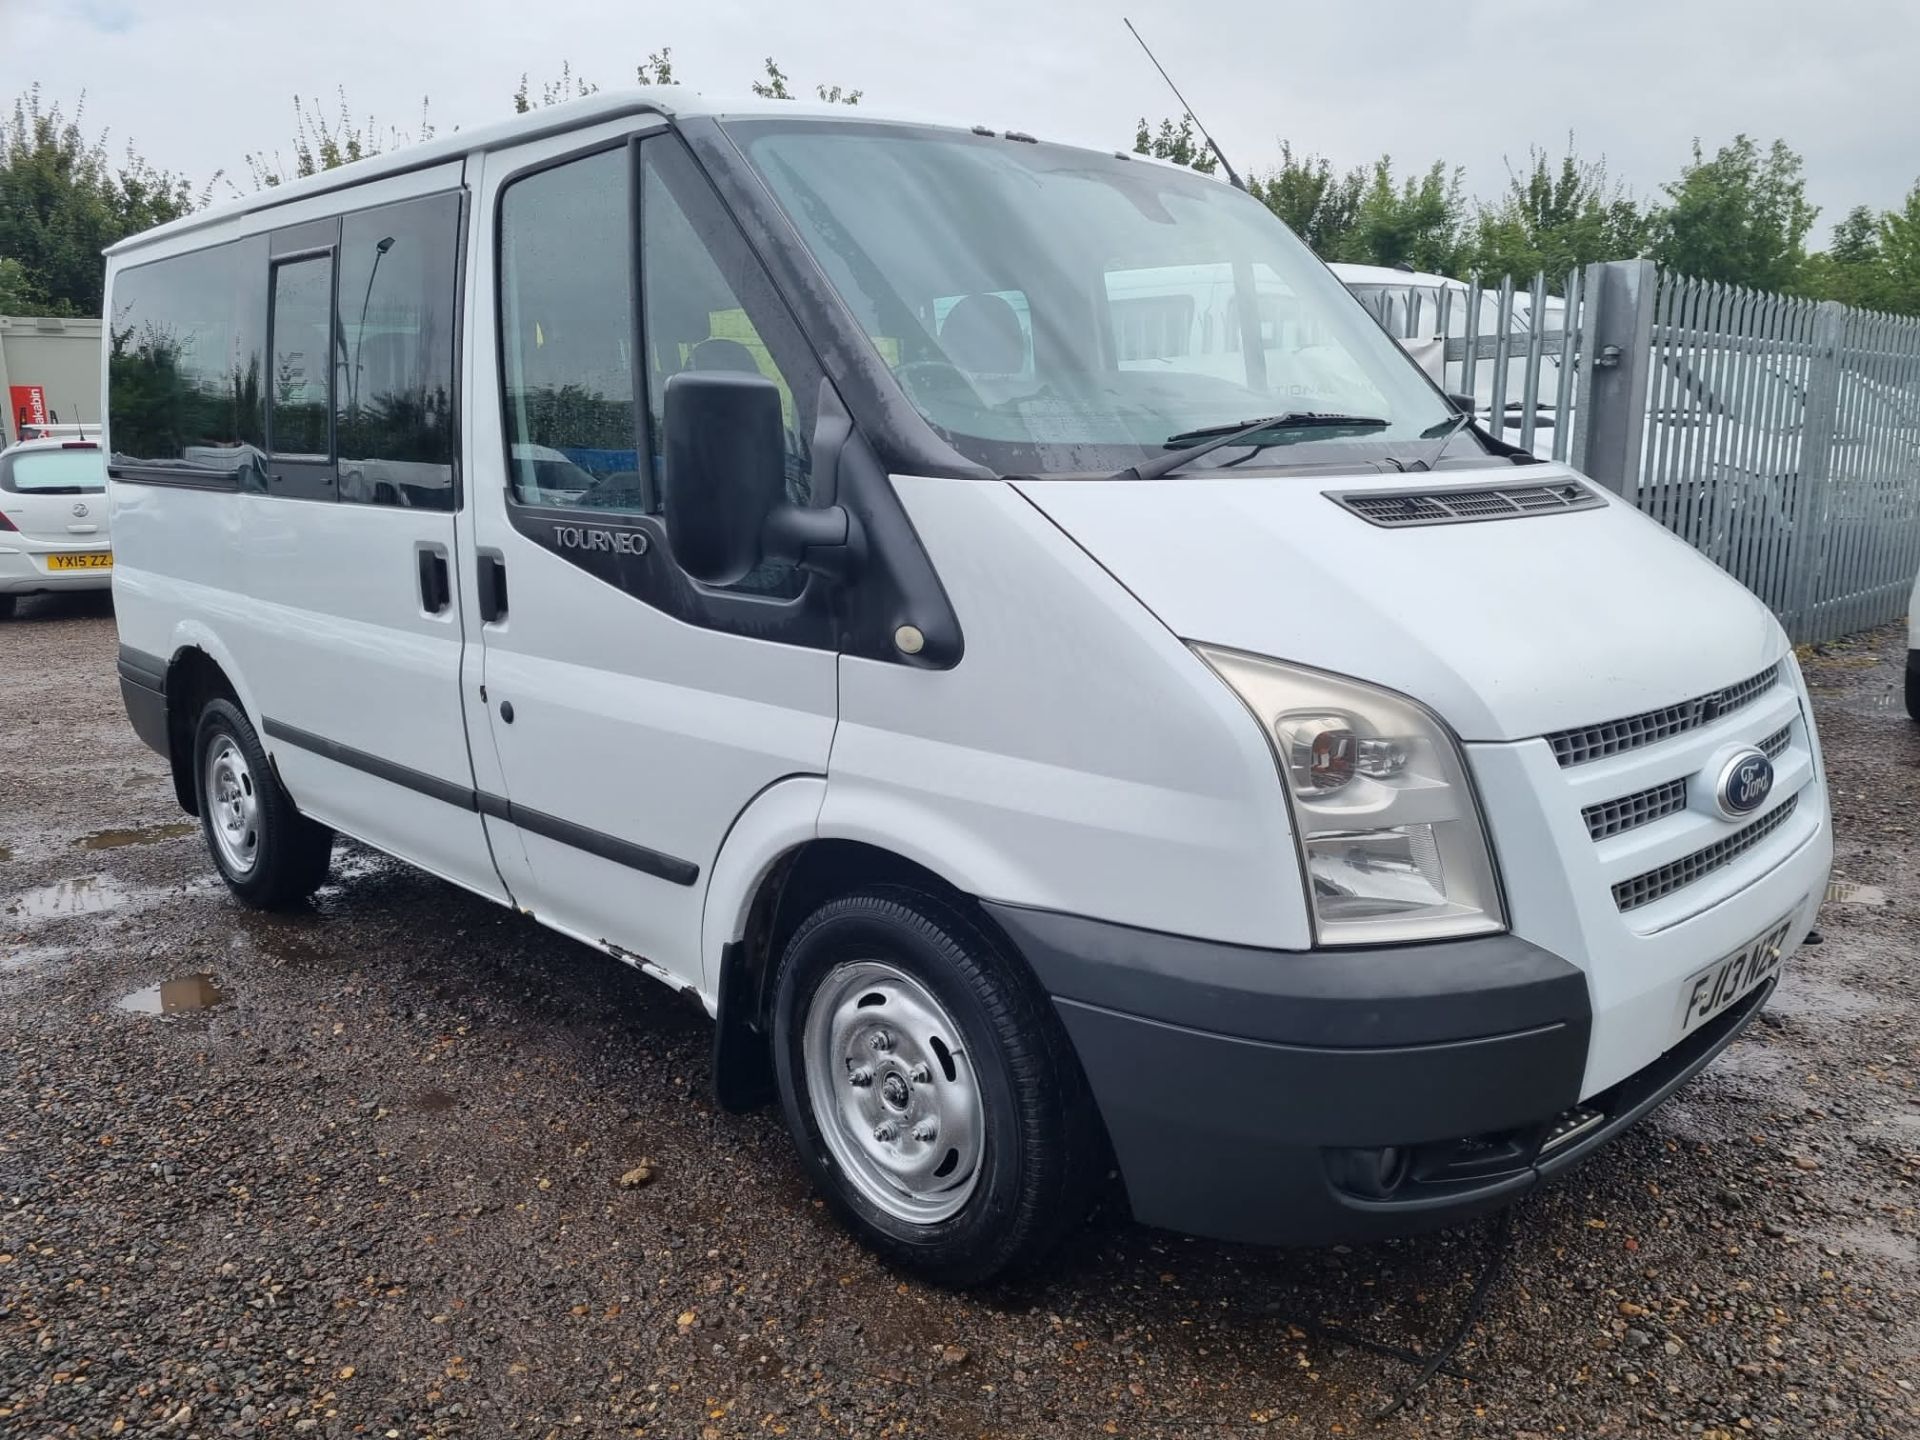 Ford Transit 2.2 TDCI Trend 2013 '13 Reg' 9 seats - Air Con - Cruise Control